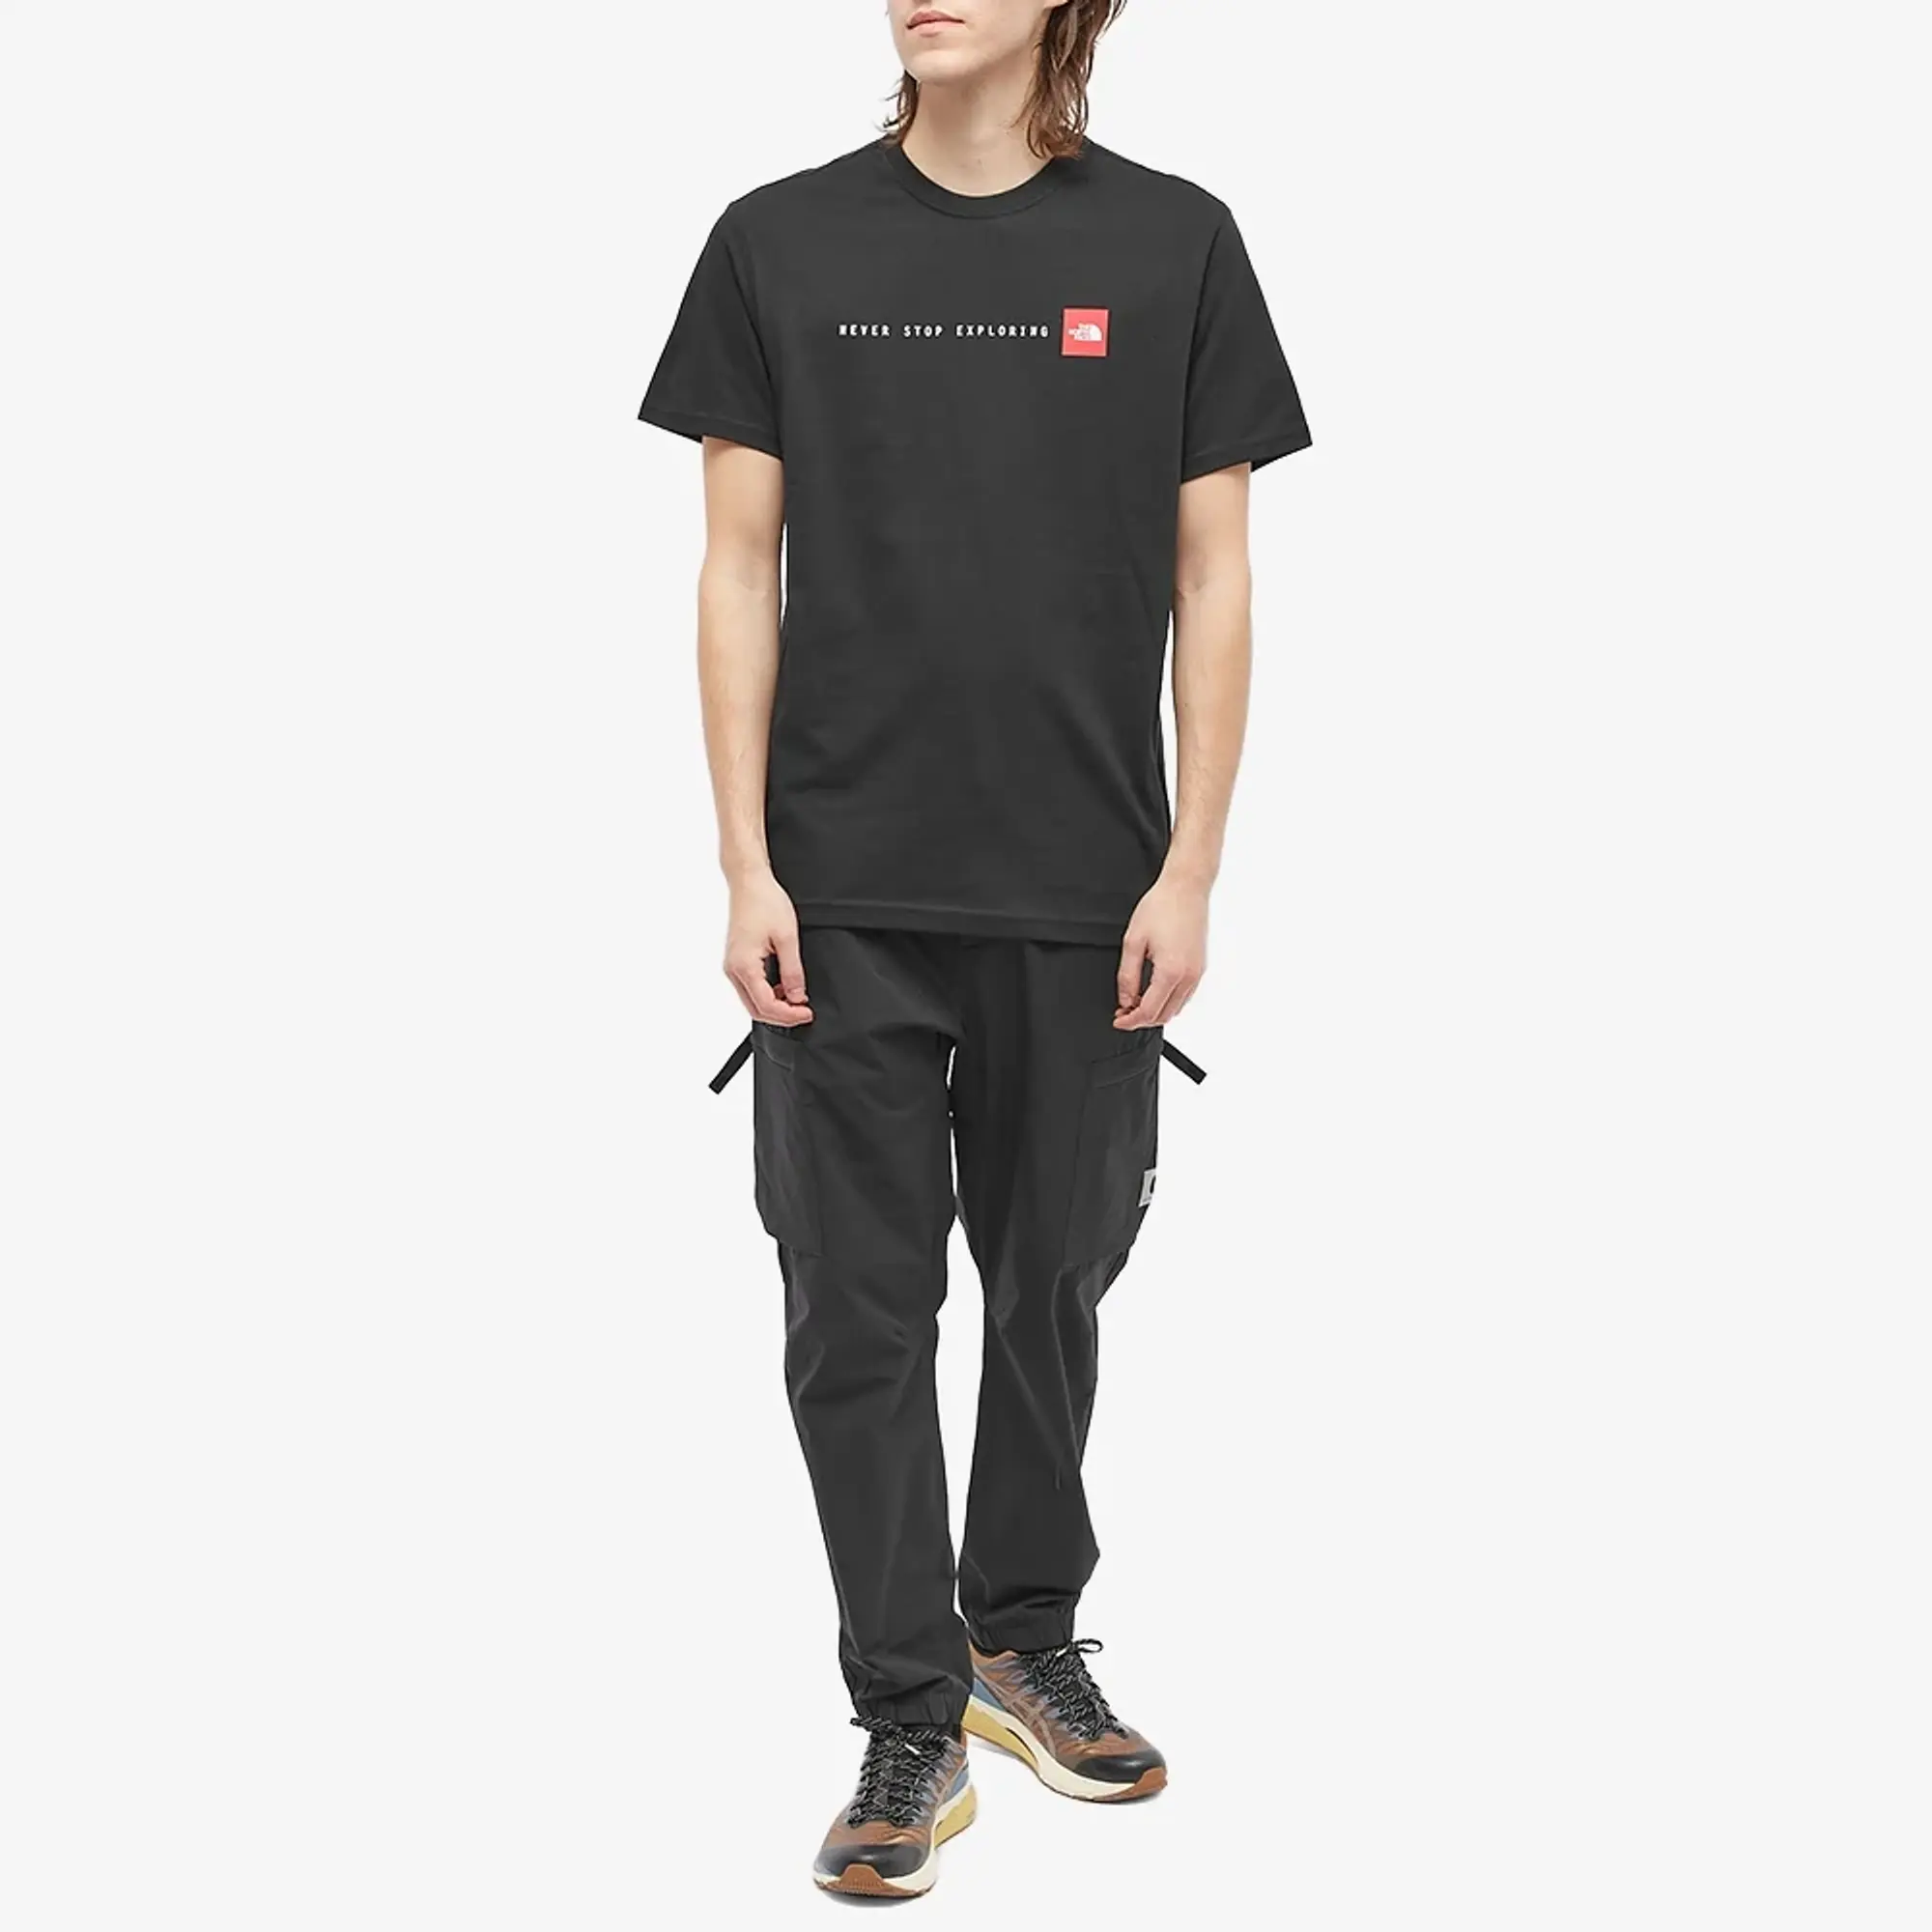 THE NORTH FACE Men's S/S Never Stop Exploring Tee - Black, Black